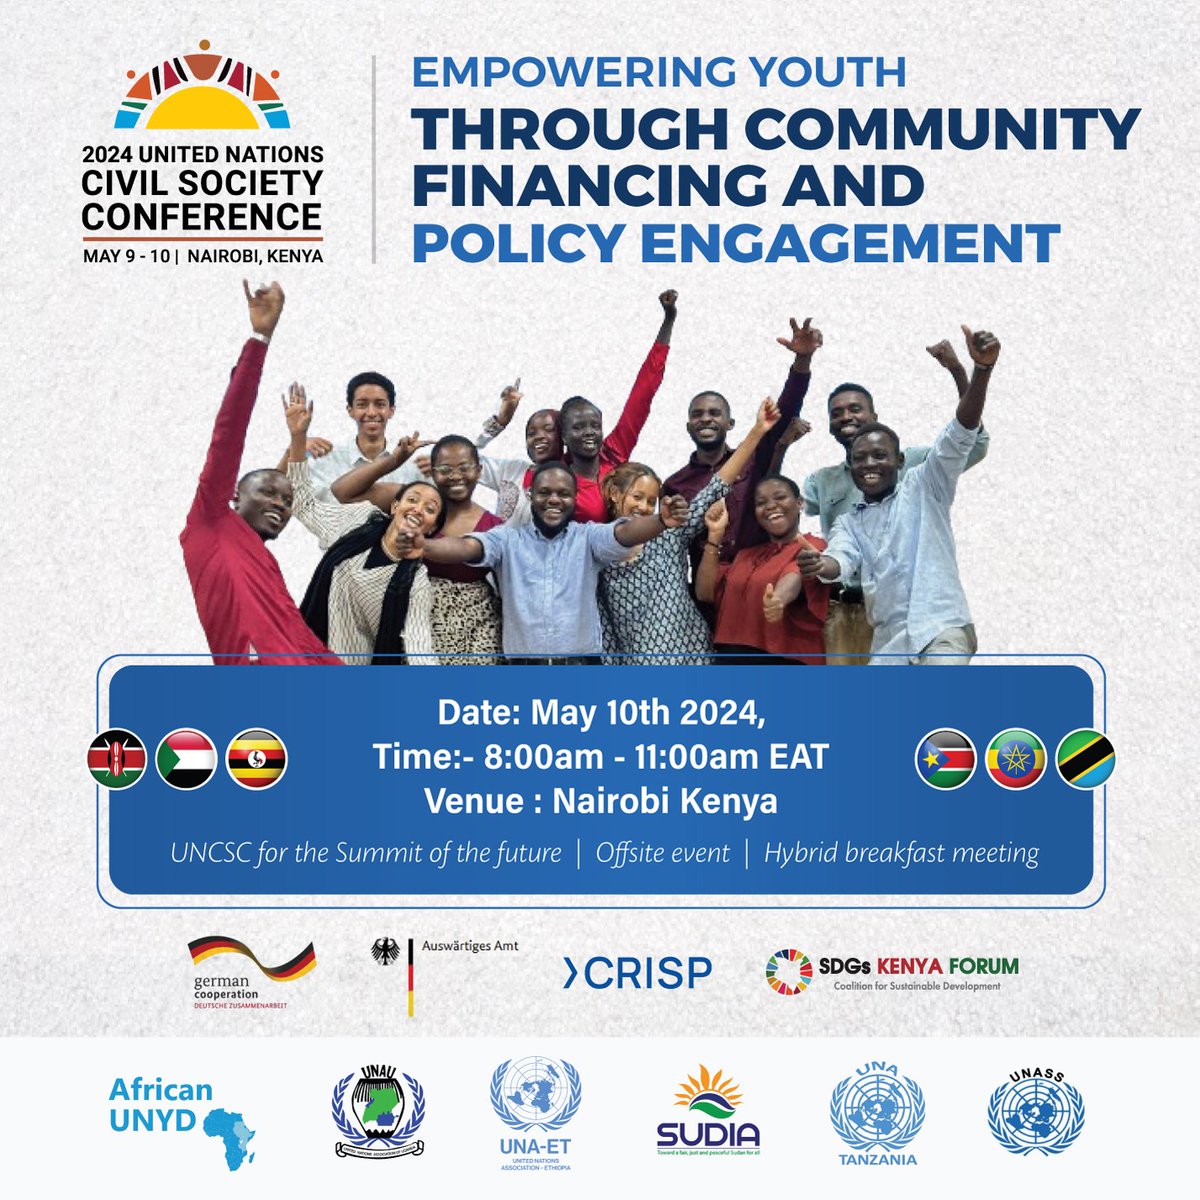 Attending the 2024 UN Civil Society Conference in Nairobi this week? 

Don't miss this event on community financing and policy engagement for Youth 
@UNAUGANDA @UNATanzania @UNAFinland @sdgs_ug @AUNYD_2023 @SDGsKenyaForum 

#Youth4SDGs
#SummitForTheFuture
#Ug3rdVNR2024